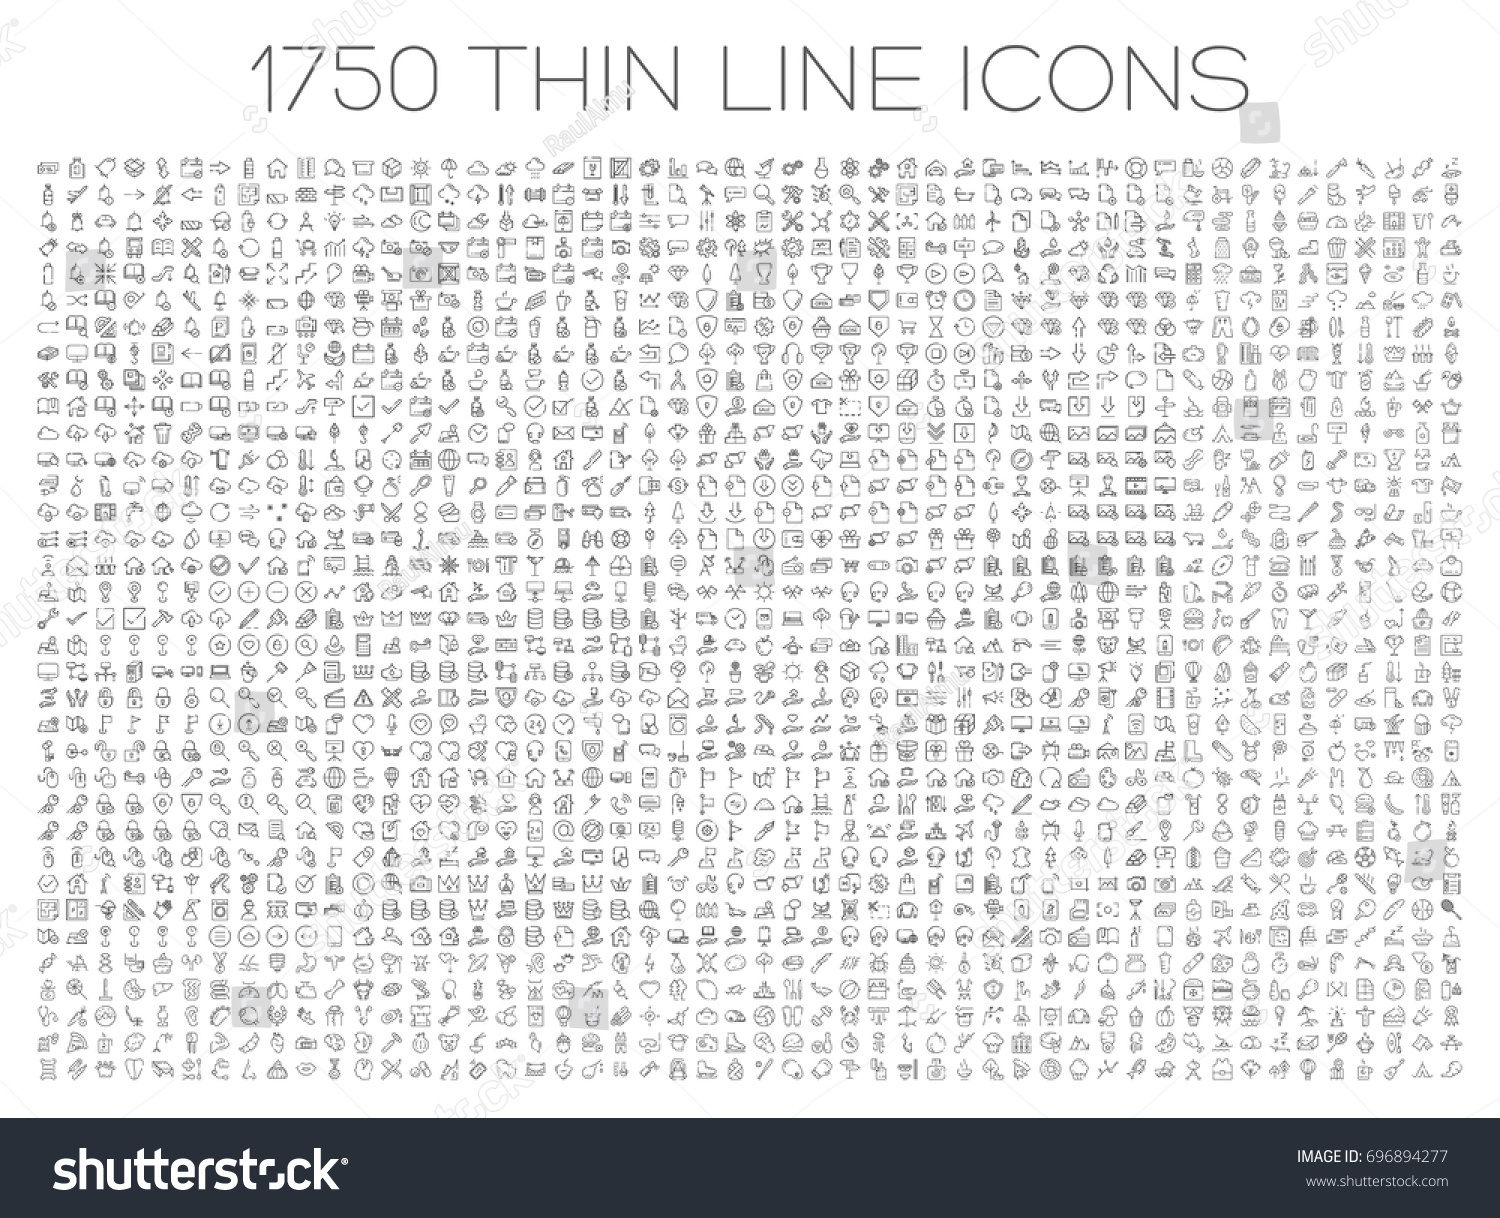 Exclusive icon set. 1750 thin line signs of food, medical, business, travel. Collection of high quality symbols for web design, mobile app, infographic. Pack of minimalistic logo on white background.  #696894277